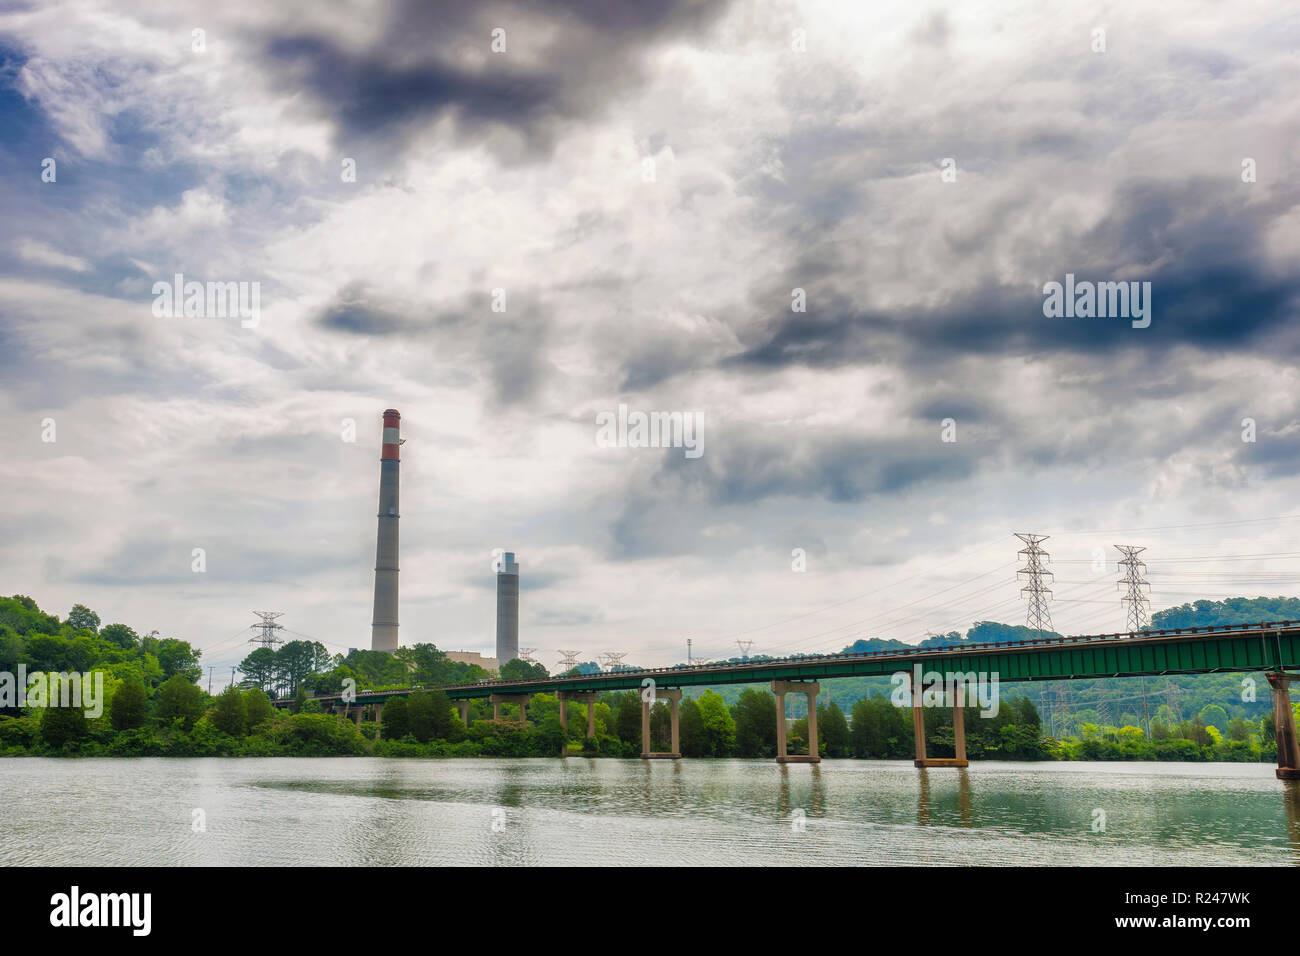 Bull Run Fossil Plant a coal-fired electric generating station in Oak Ridge, Tennessee, seen from the opposite shore along a walking path that follows Stock Photo